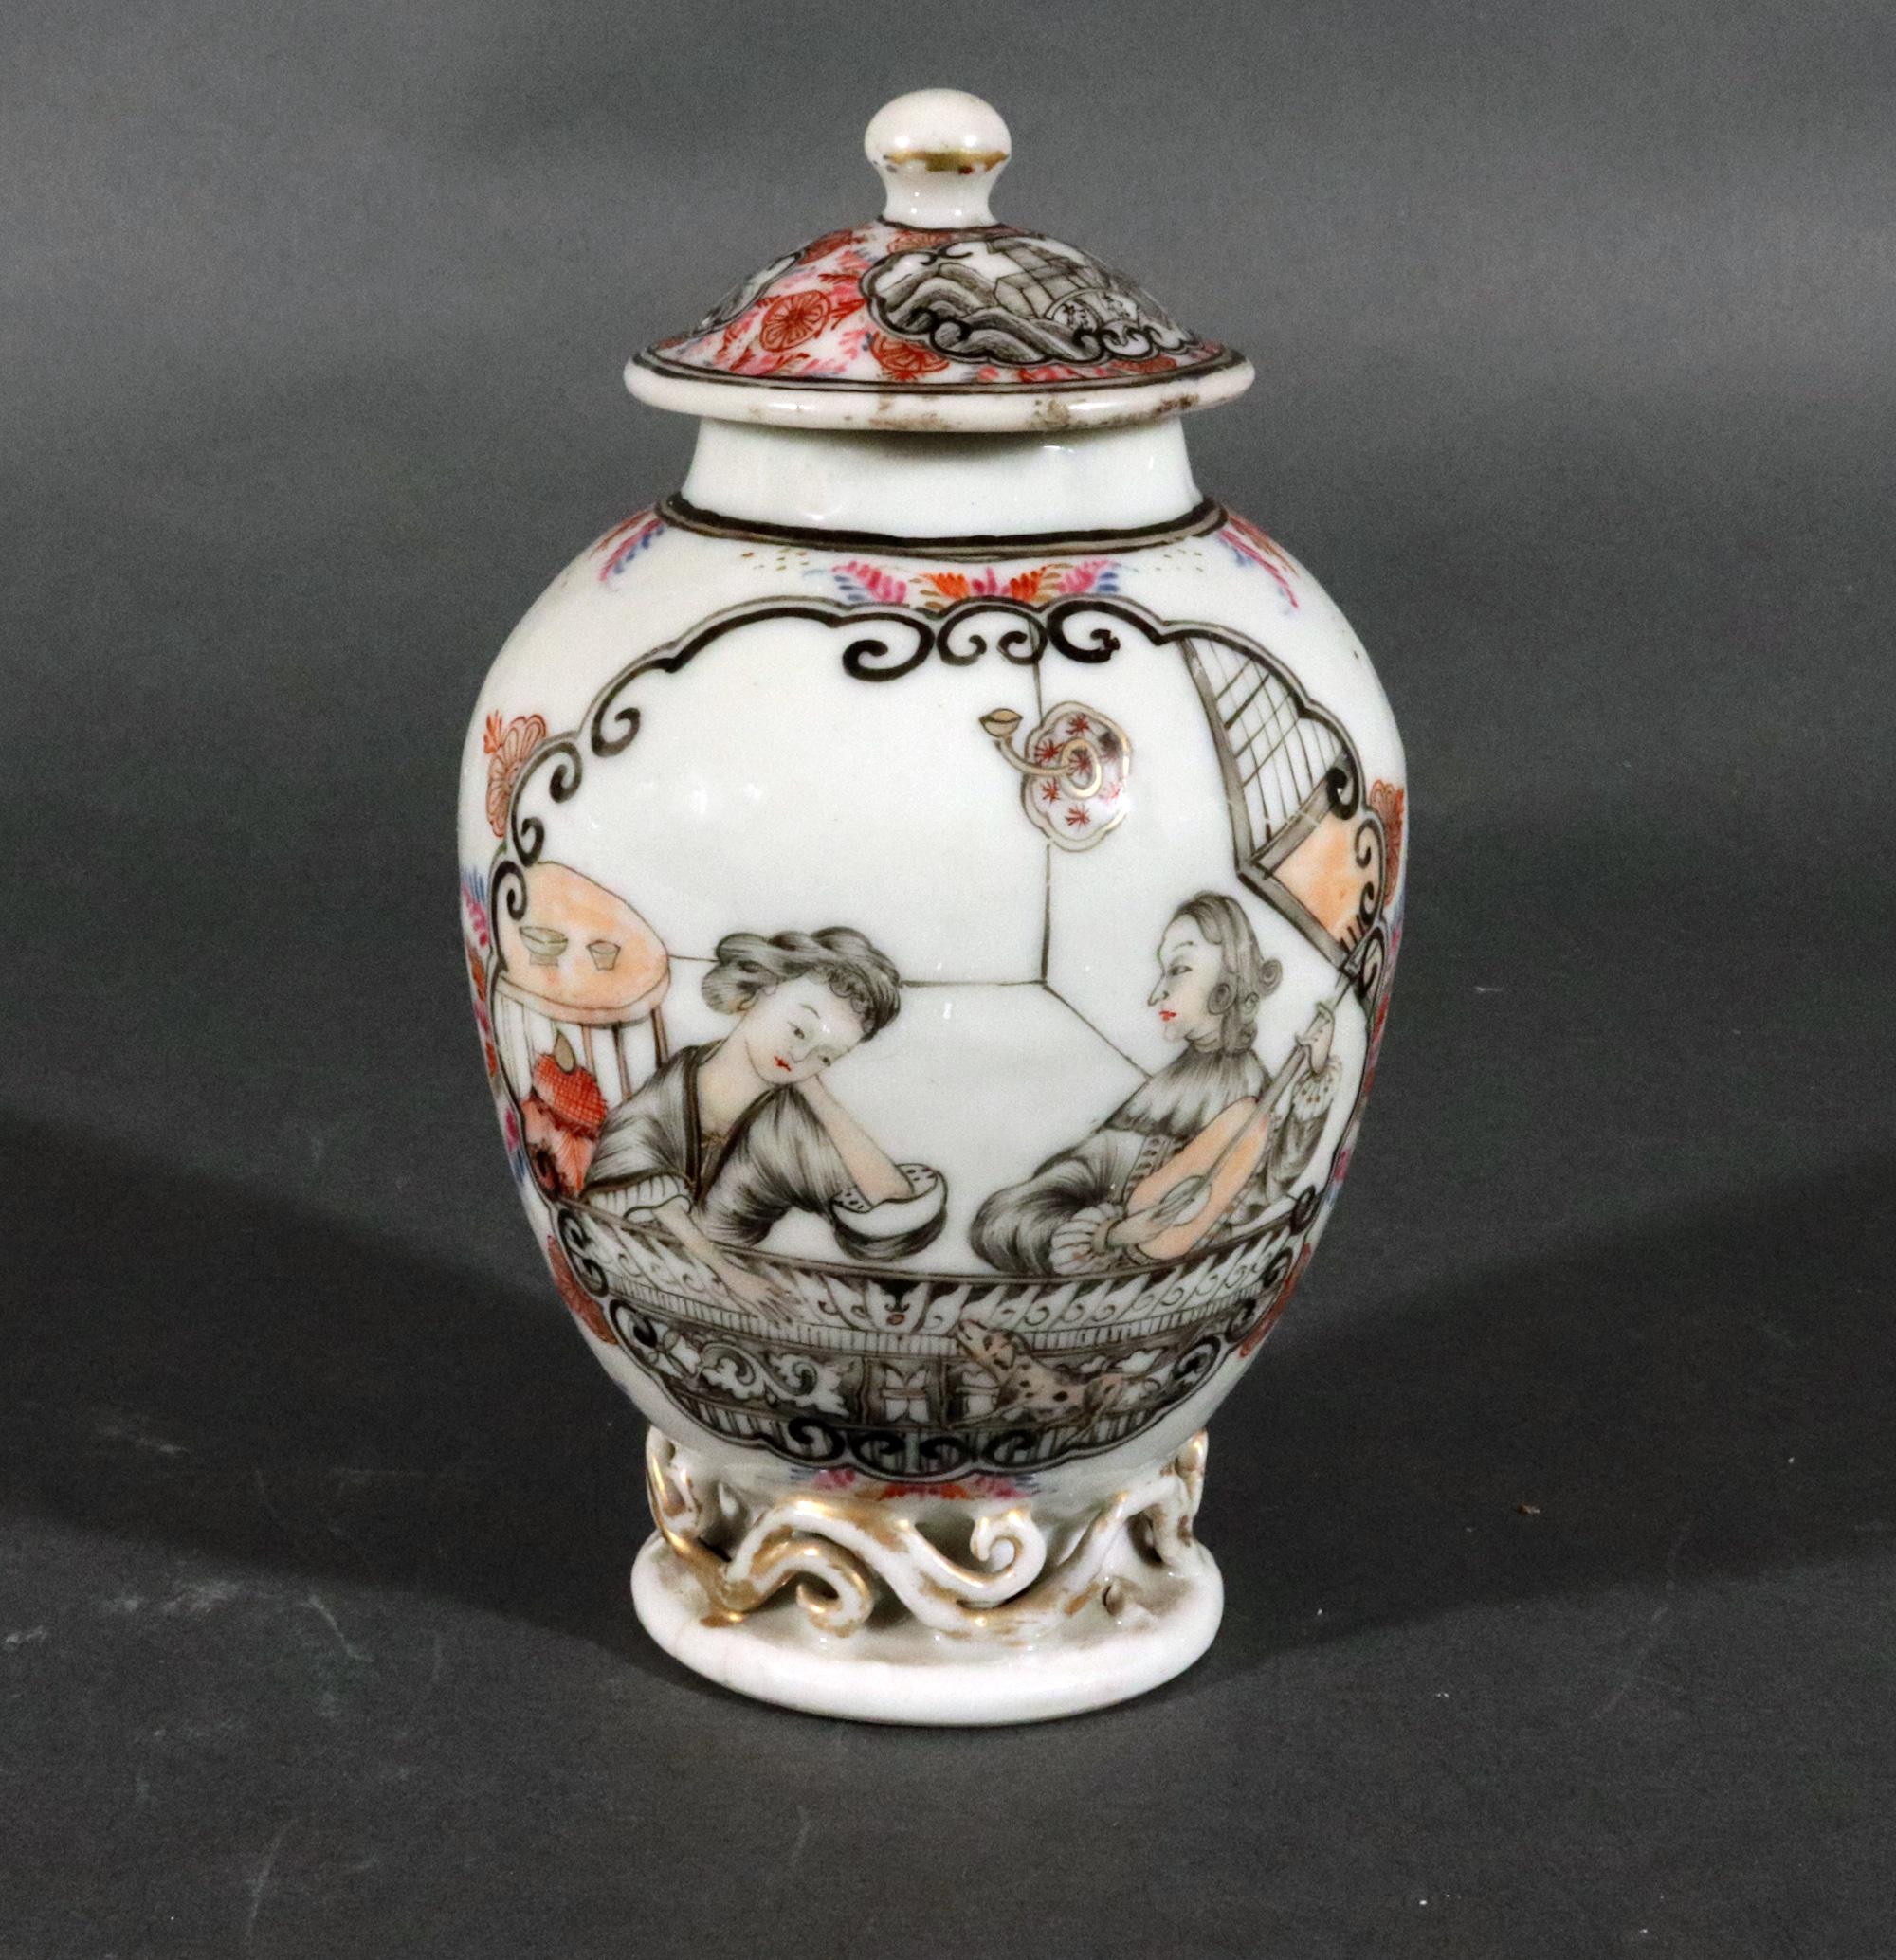 Chinese Export En Grisaille Teapoy with European Figures,
Mandolin Players and Lady with Dog,
Circa 1735

The charming Chinese Export porcelain teapoy and cover is painted to each side en grisaille with iron-red details.

To one side is an image of